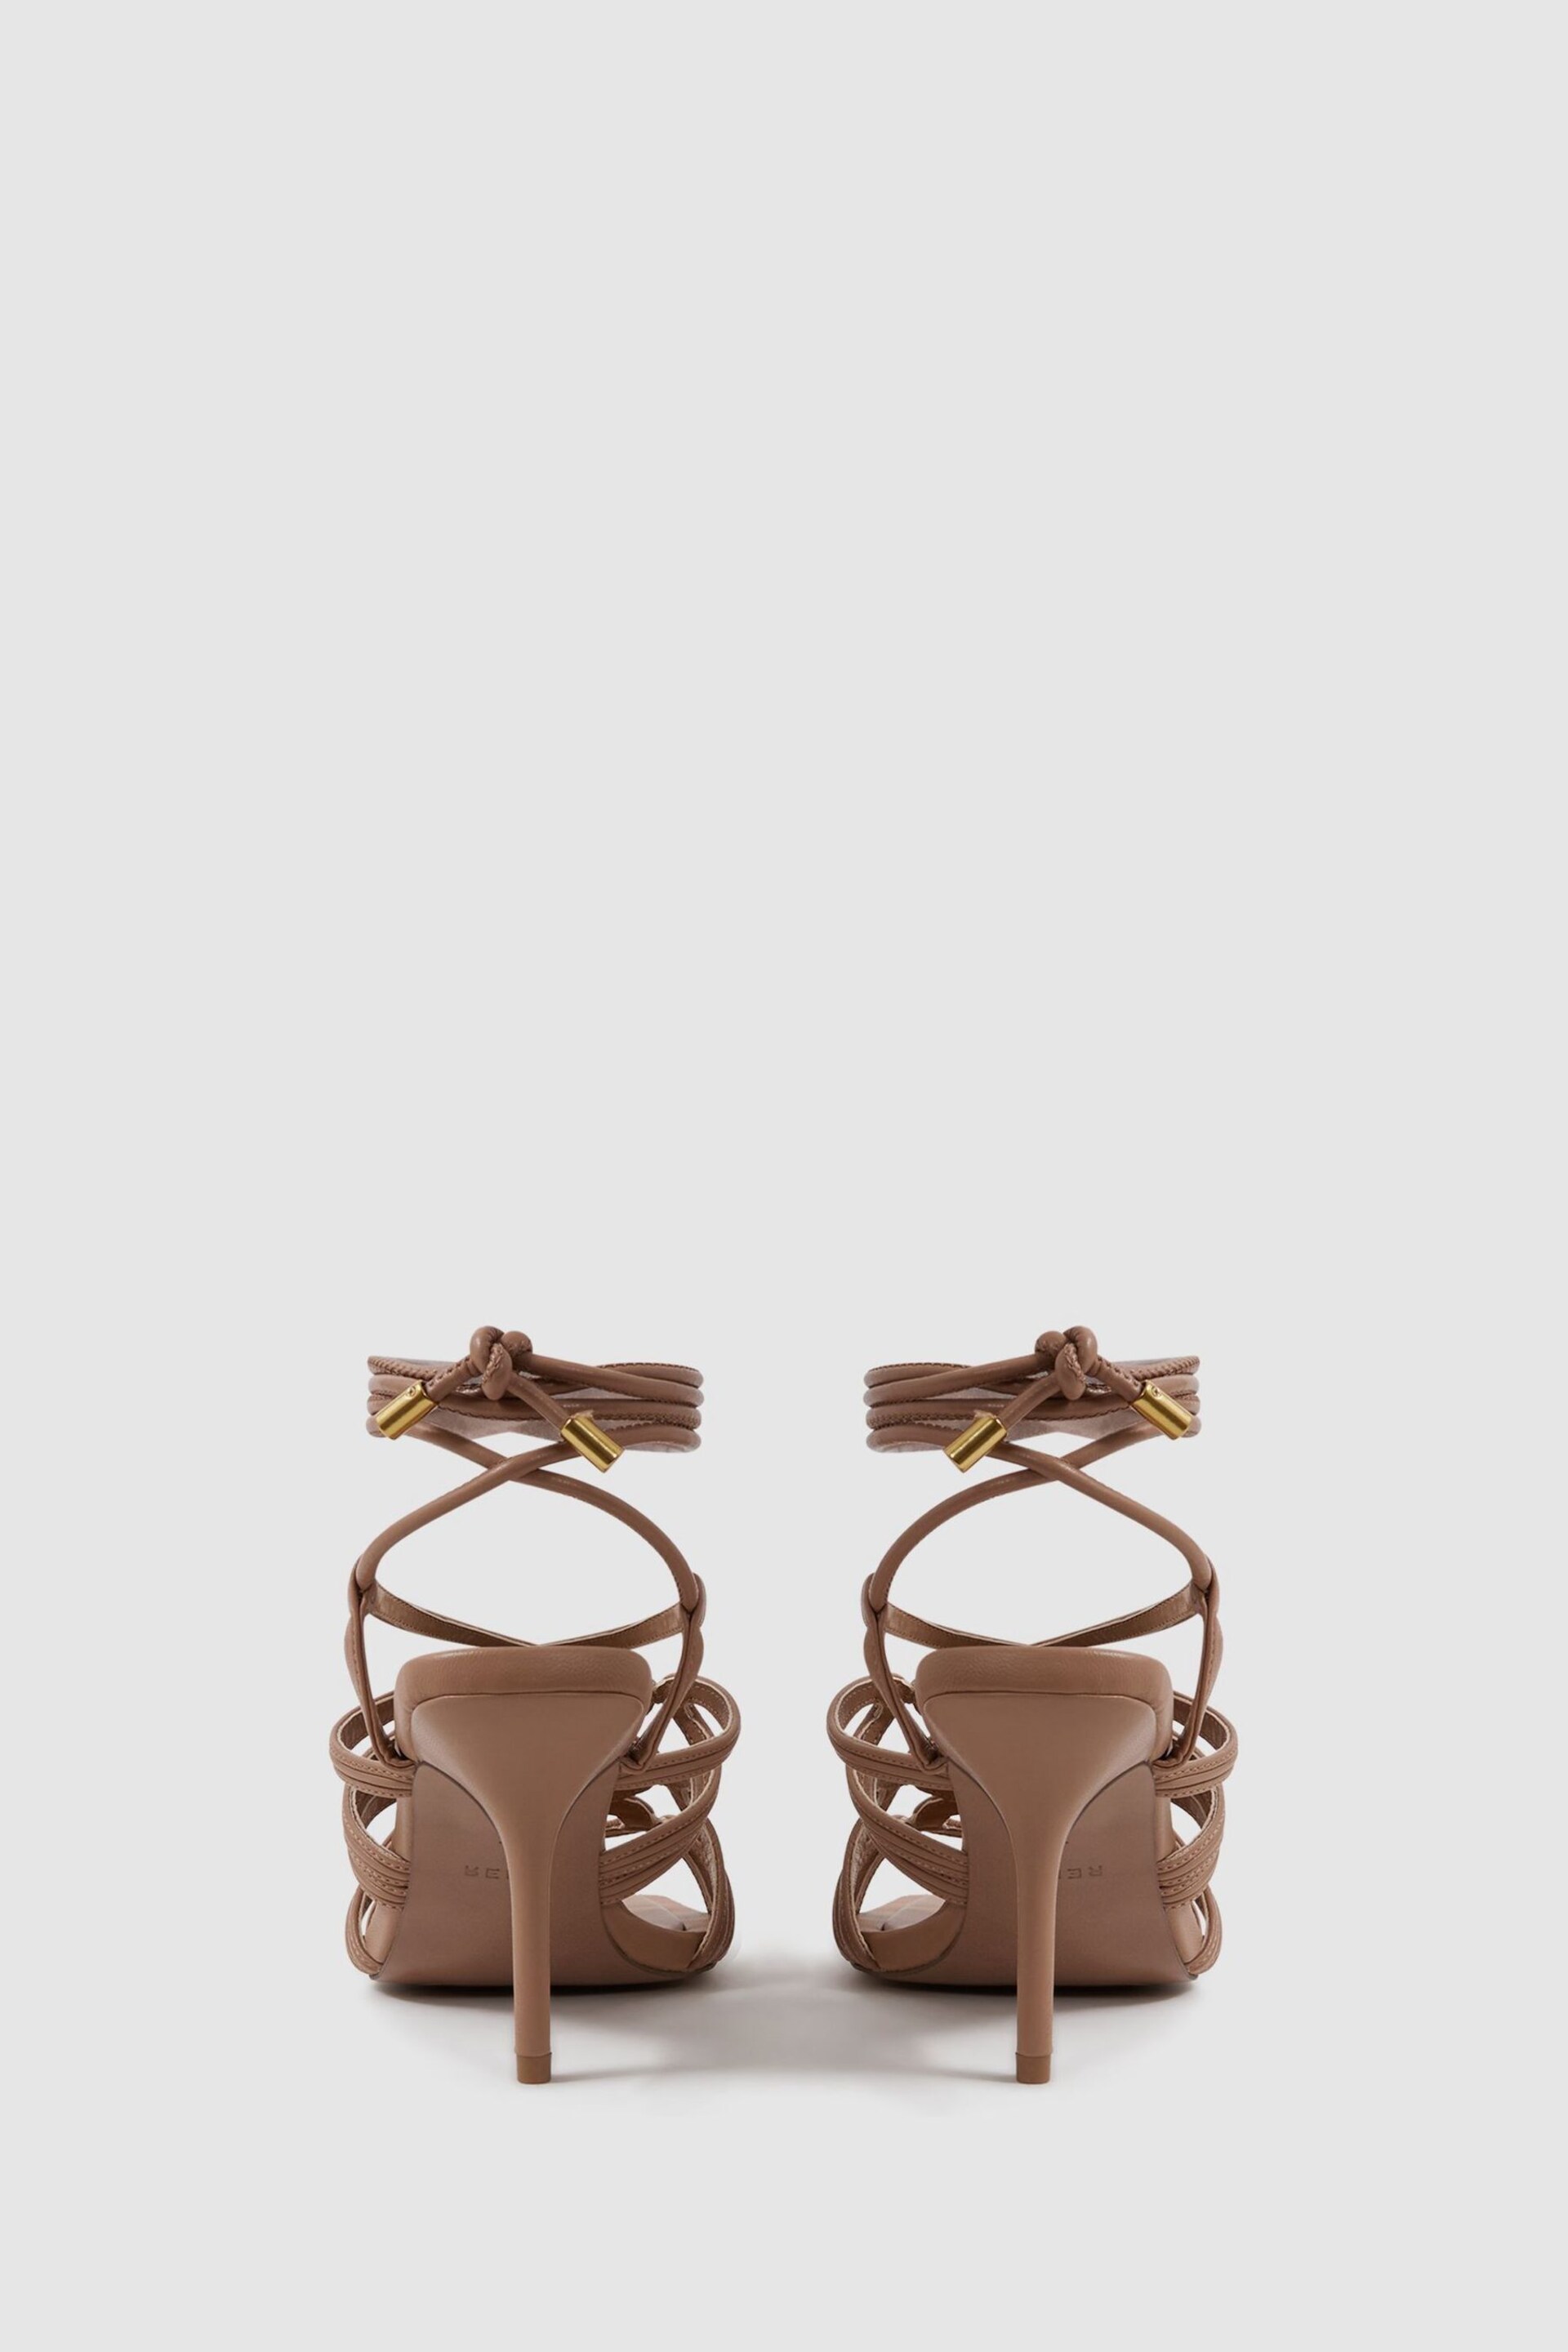 Reiss Nude Keira Strappy Open Toe Heeled Sandals - Image 4 of 5